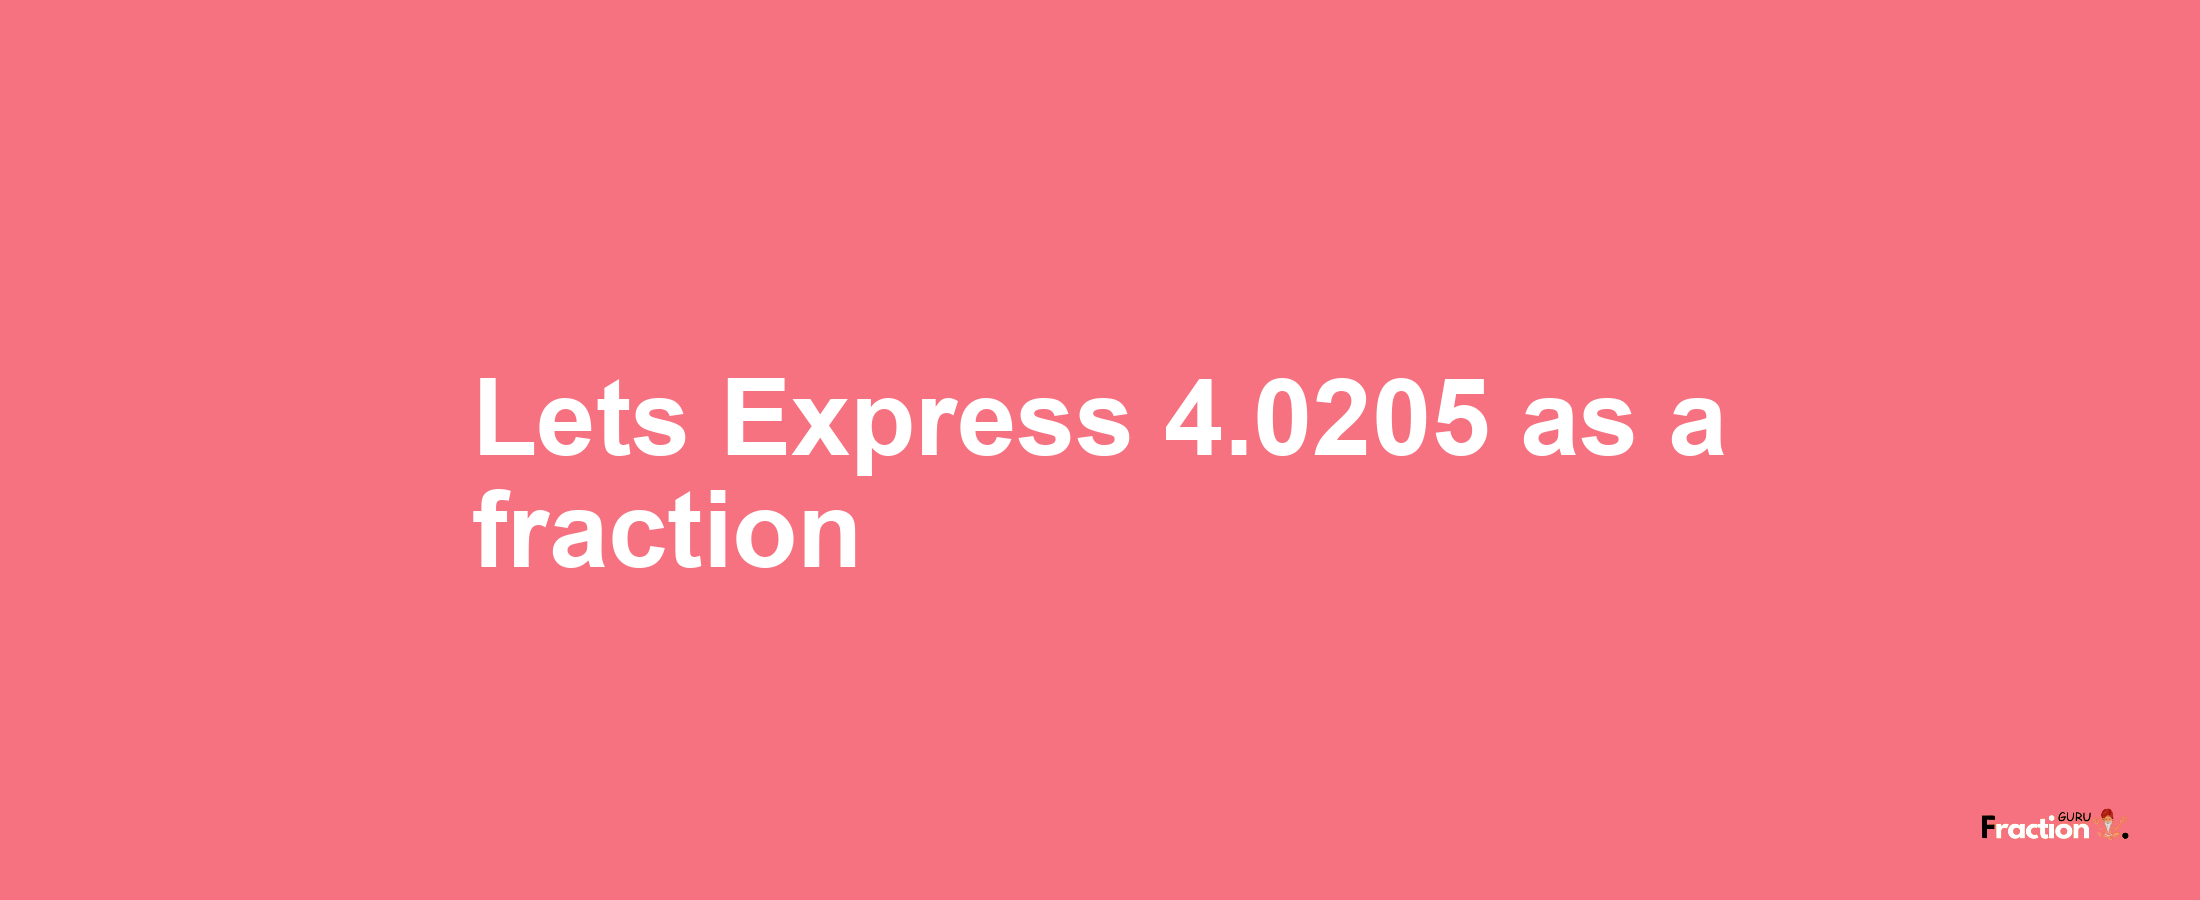 Lets Express 4.0205 as afraction